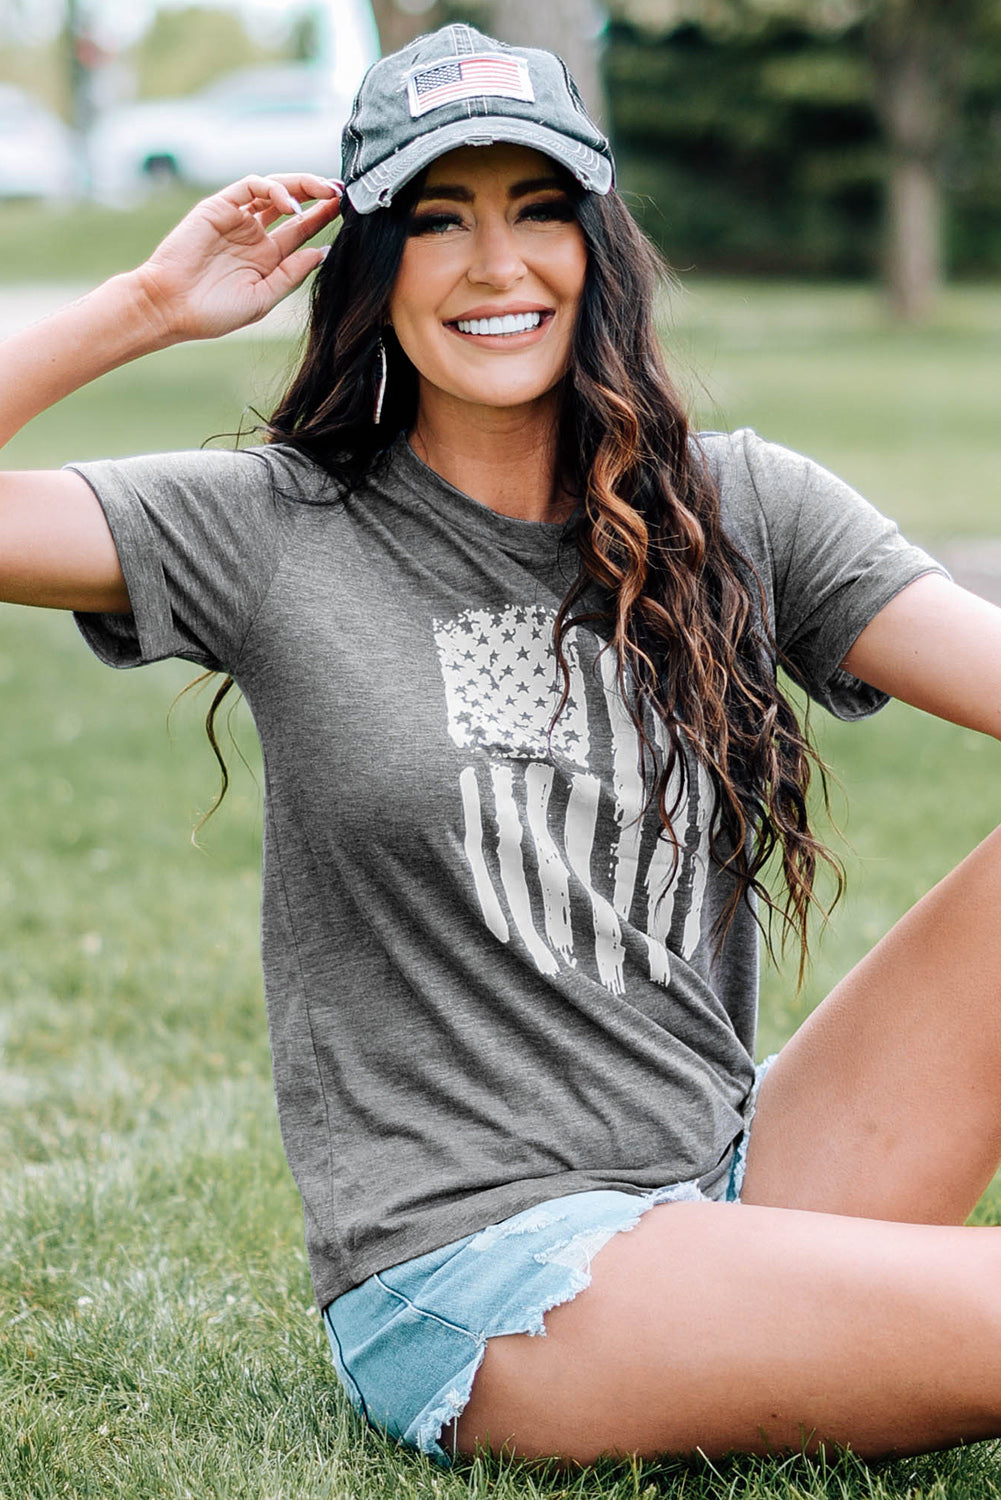 Upgrade your casual look with our cuffed sleeve tee, offering both comfort and chic style.